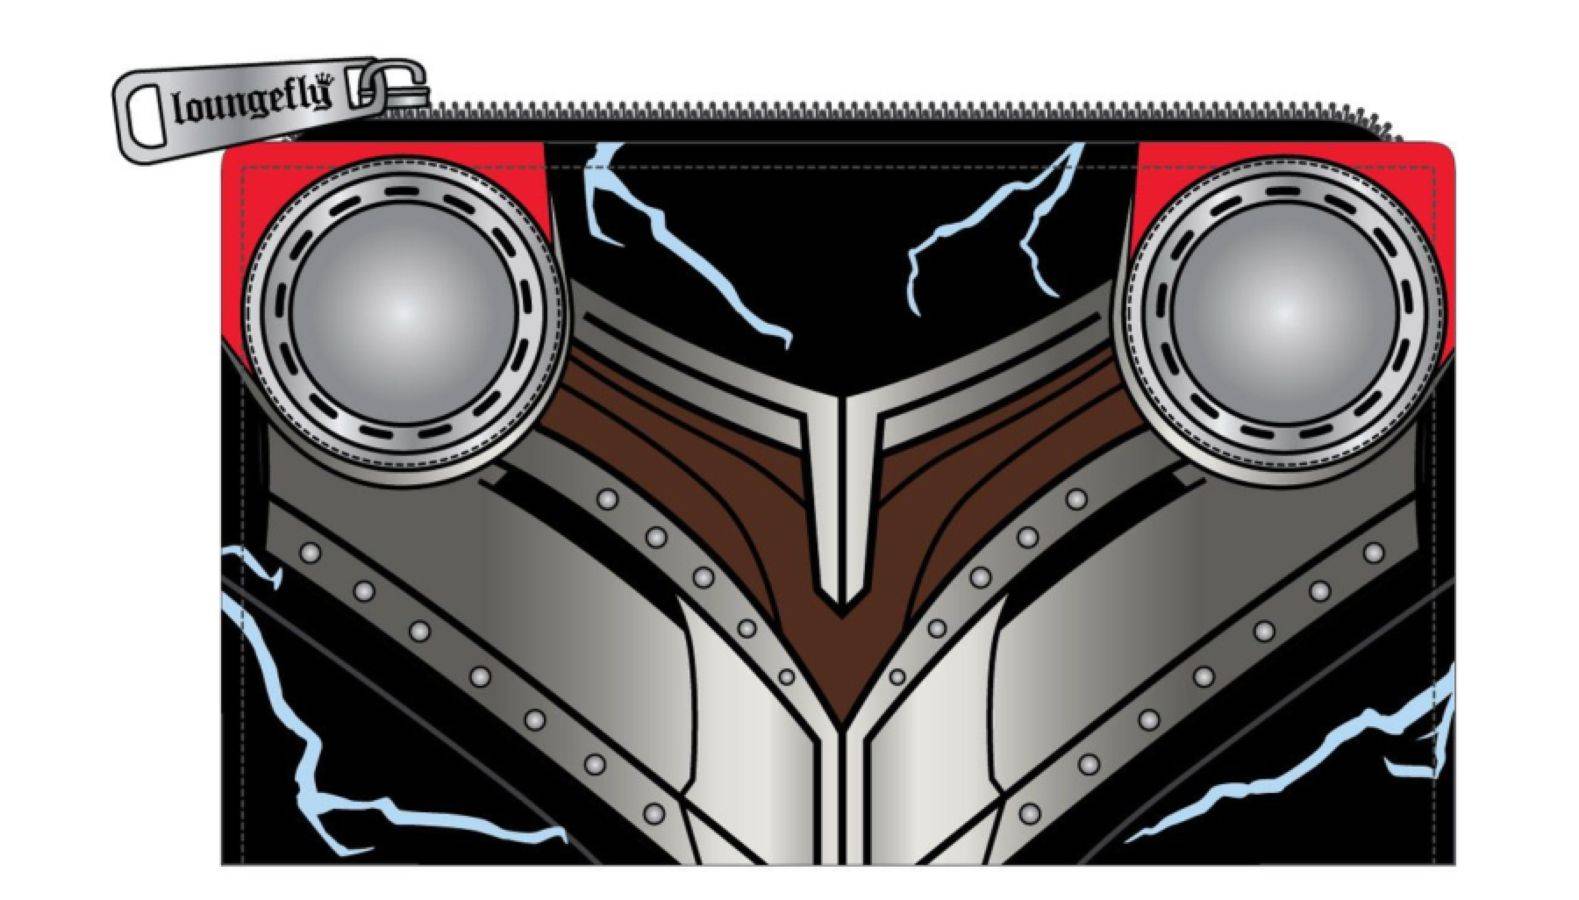 Thor 4: Love and Thunder - Thor Costume Glow Flap Purse